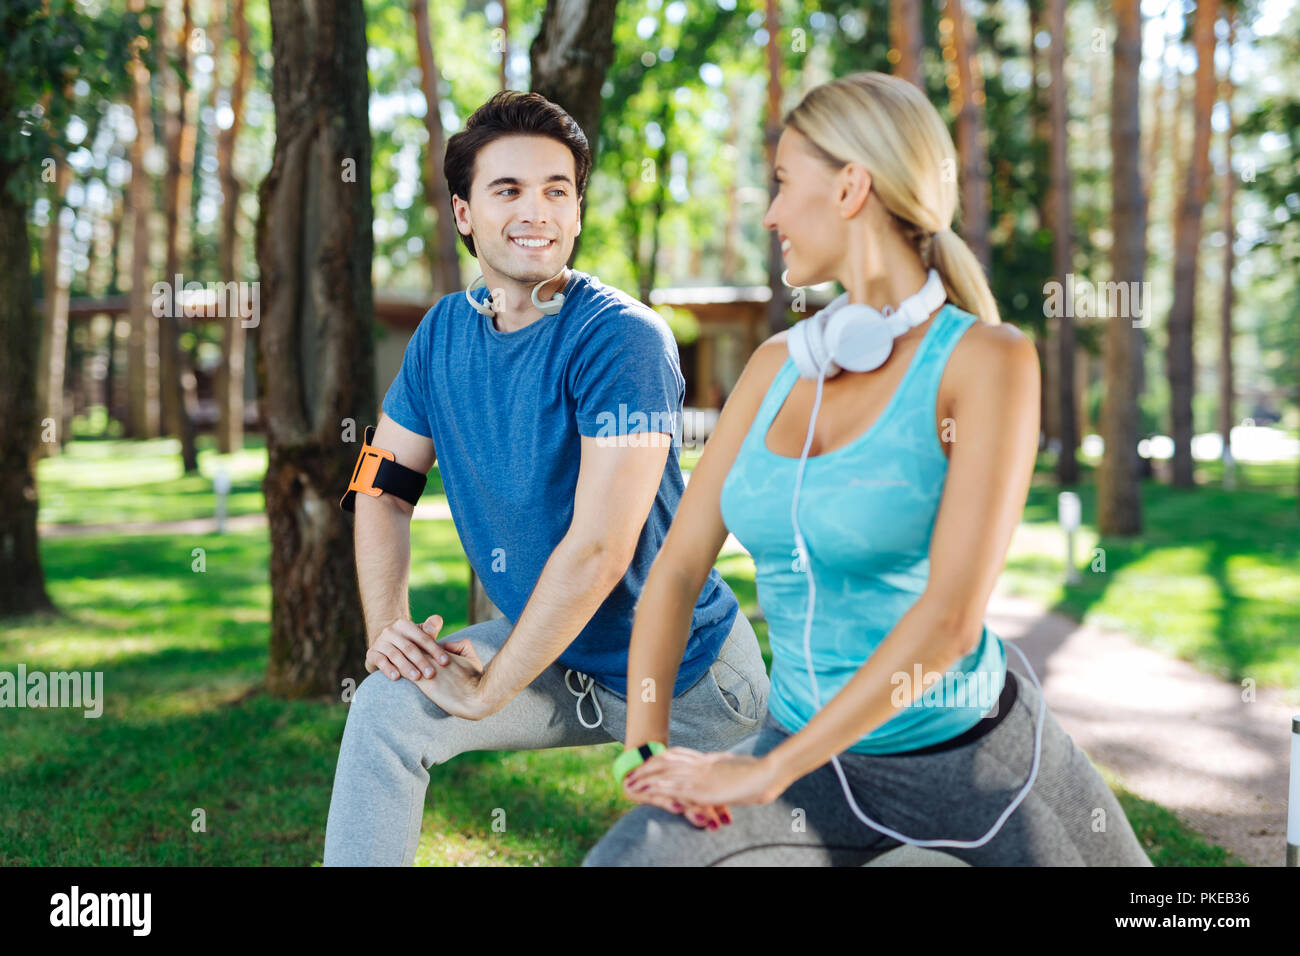 Nice pleasant man exercising with his girlfriend Stock Photo